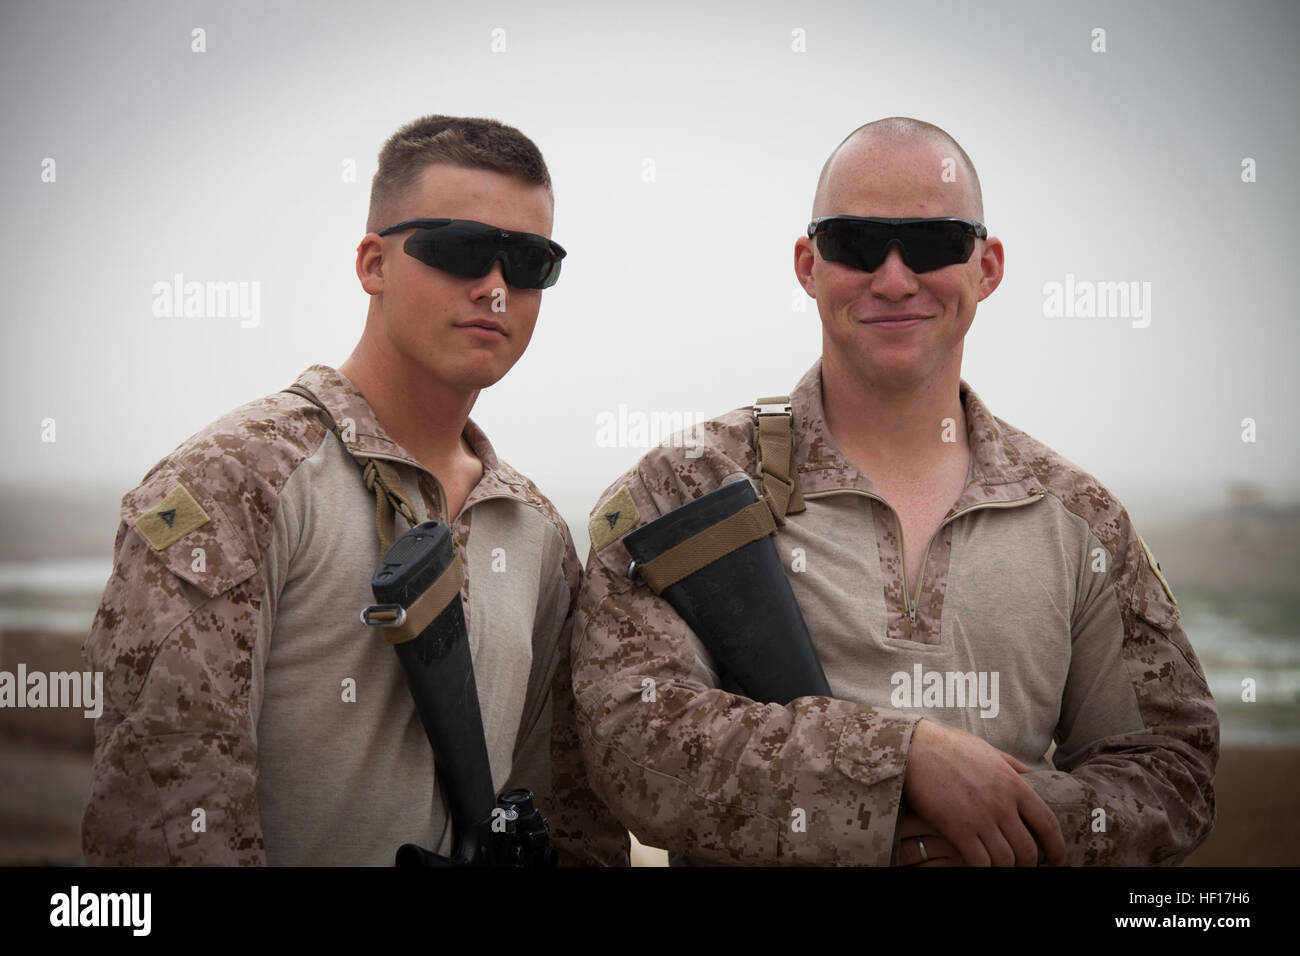 U.S. Marine Corps Lance Cpls. Mark Pittman, left, and Mark Howell, both with 3rd Battalion, 4th Marine Regiment, Regimental Combat Team 7, pose for a photo at the Afghan Uniformed Police station during Operation Eagle in Delaram city, Helmand province, Afghanistan, April 8, 2013. Pittman and Howell were part of the security force detail for the 4th Brigade, 215th Corps Brigade Advisor Team that was conducting Operation Eagle, an Afghan-led clearing operation. (U.S. Marine Corps photo by Staff Sgt. Ezekiel R. Kitandwe/Released) Brotherhood 130408-M-RO295-170 Stock Photo